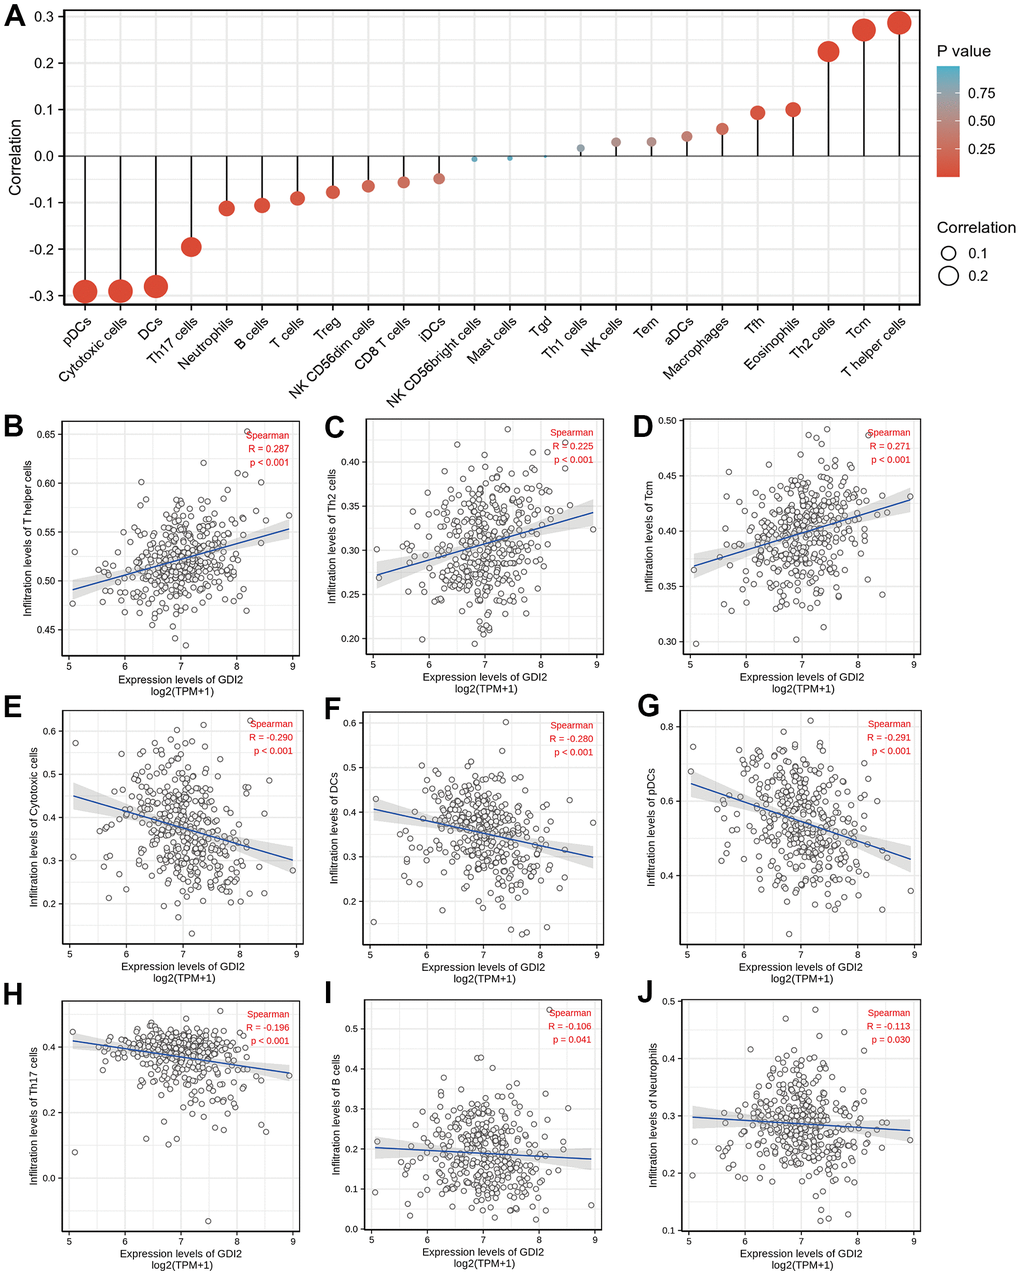 Immune infiltration analysis based on GDI2 expression by ssGSEA. (A) The GDI2 expression level was associated with the relative abundances of 24 immune cell subsets involved in immune infiltration in the tumor microenvironment. (B–J) Correlation between the relative enrichment score of immune cells and the expression level (TPM) of GDI2. The size of dots shows the absolute value of Spearman R. Positive correlations were found in (B) T helper cells; (C) Th2 cells; and (D) Tcm cells, Negative correlations were found in (E) Cytotoxic cells; (F) Dendritic cells (DCs); (G) Plasmacytoid Dendritic cells (pDCs); (H) Th17 cells; (I) B cells; and (J) Neutrophils. *P 